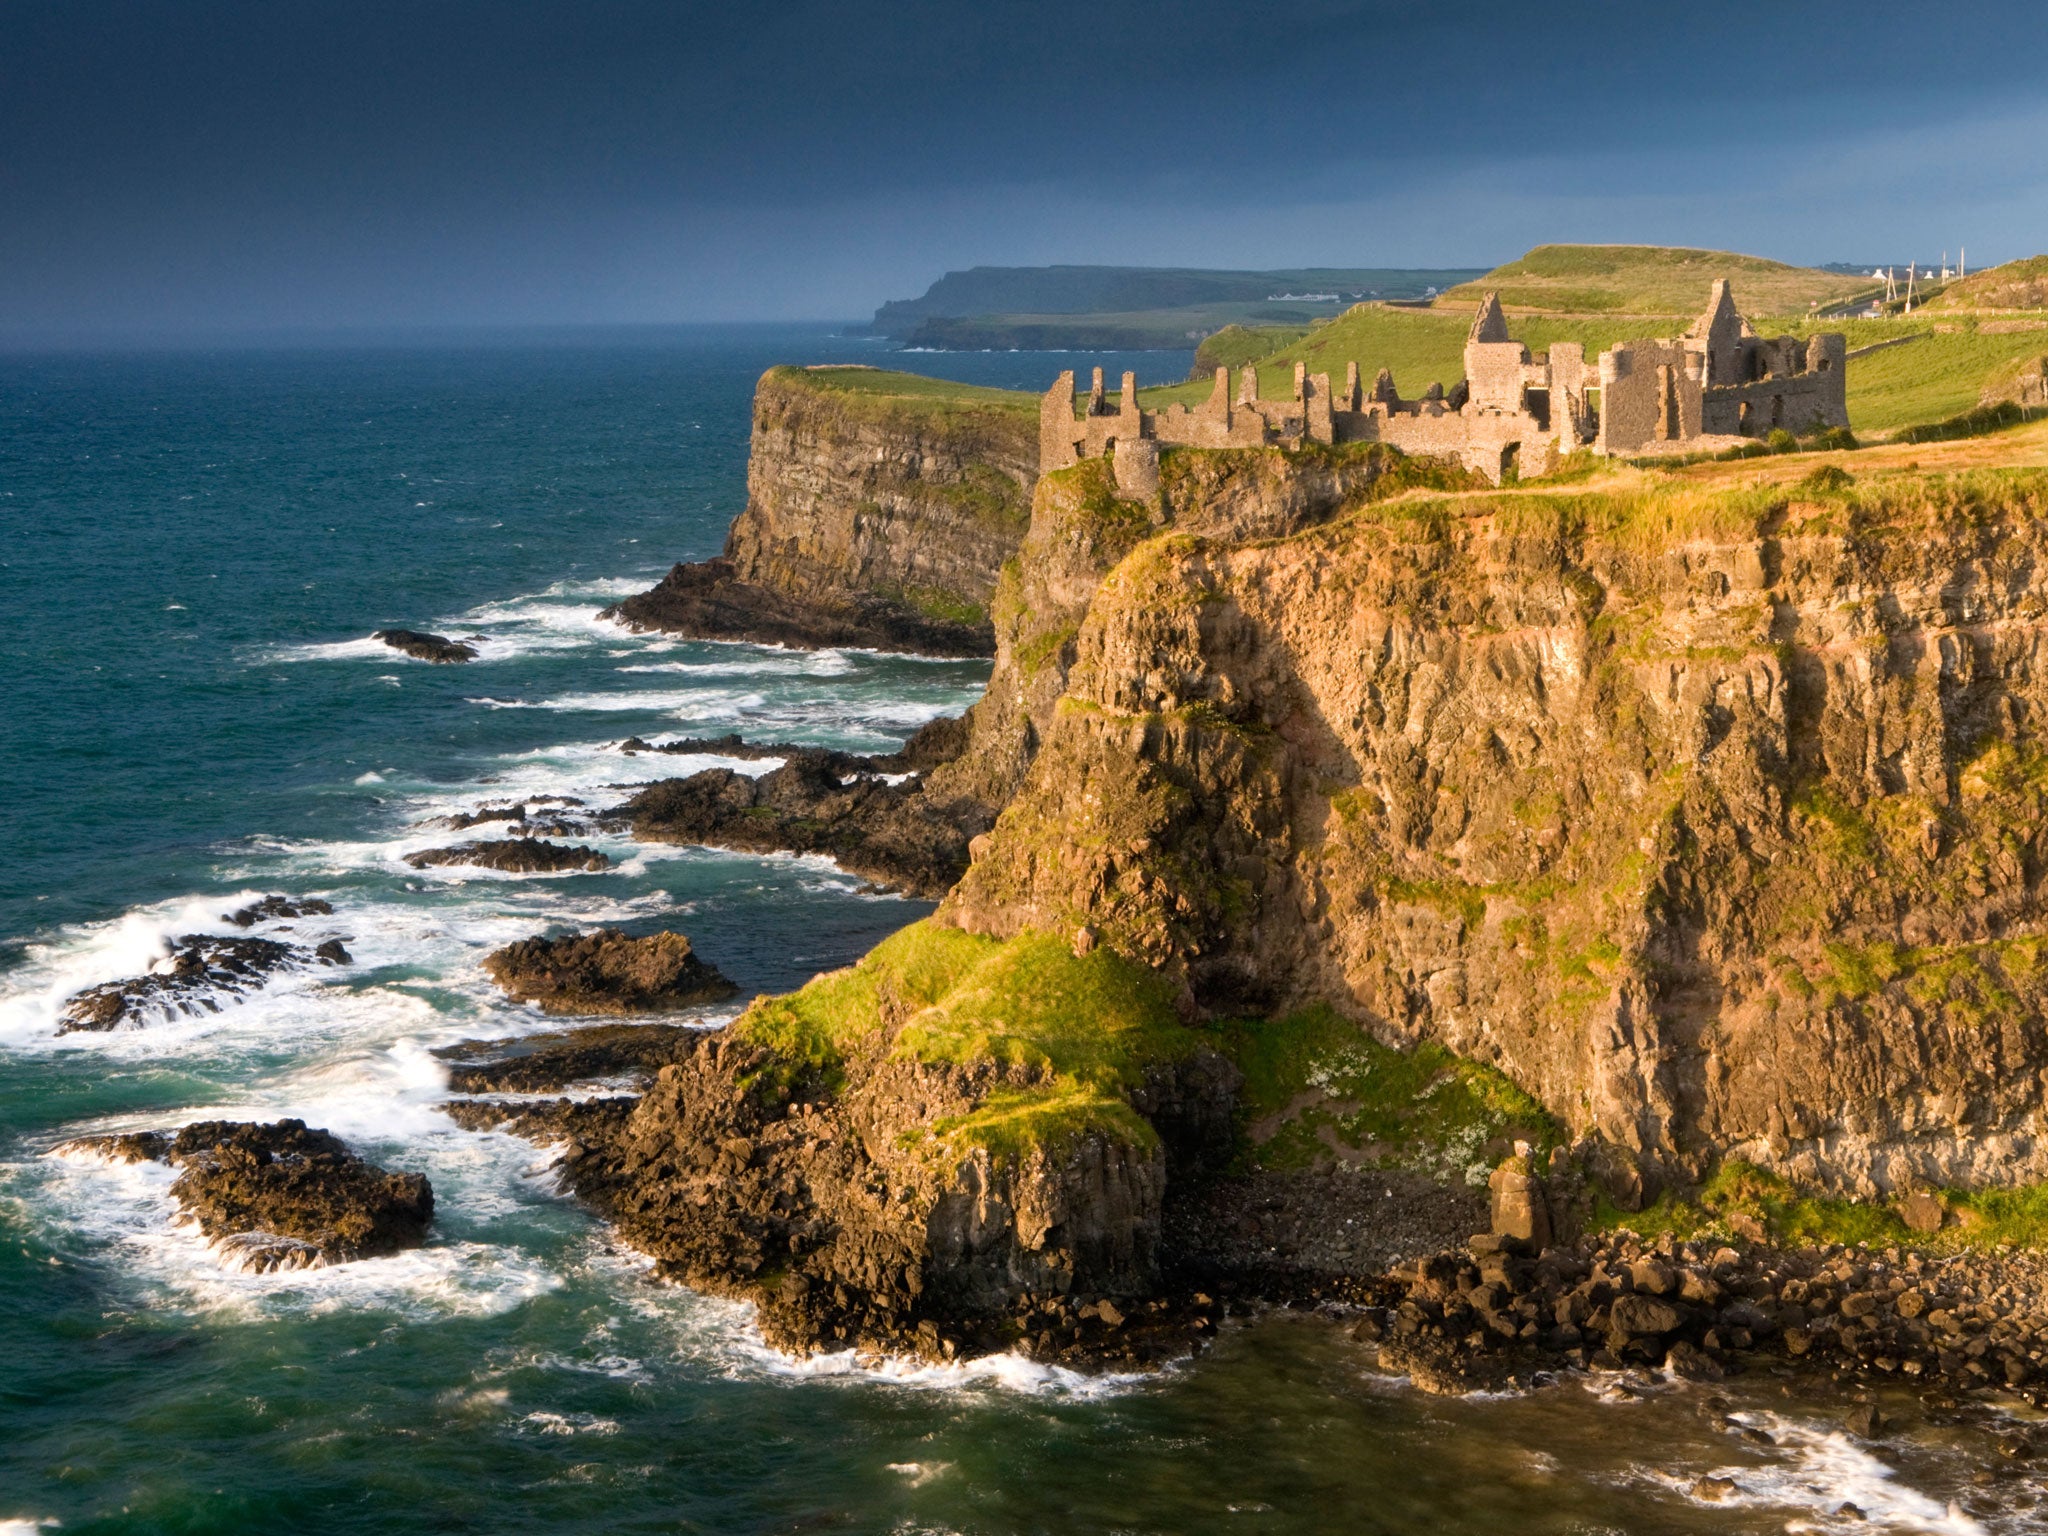 Dunluce Castle - or House of Greyjoy, as Game of Thrones fans will know it